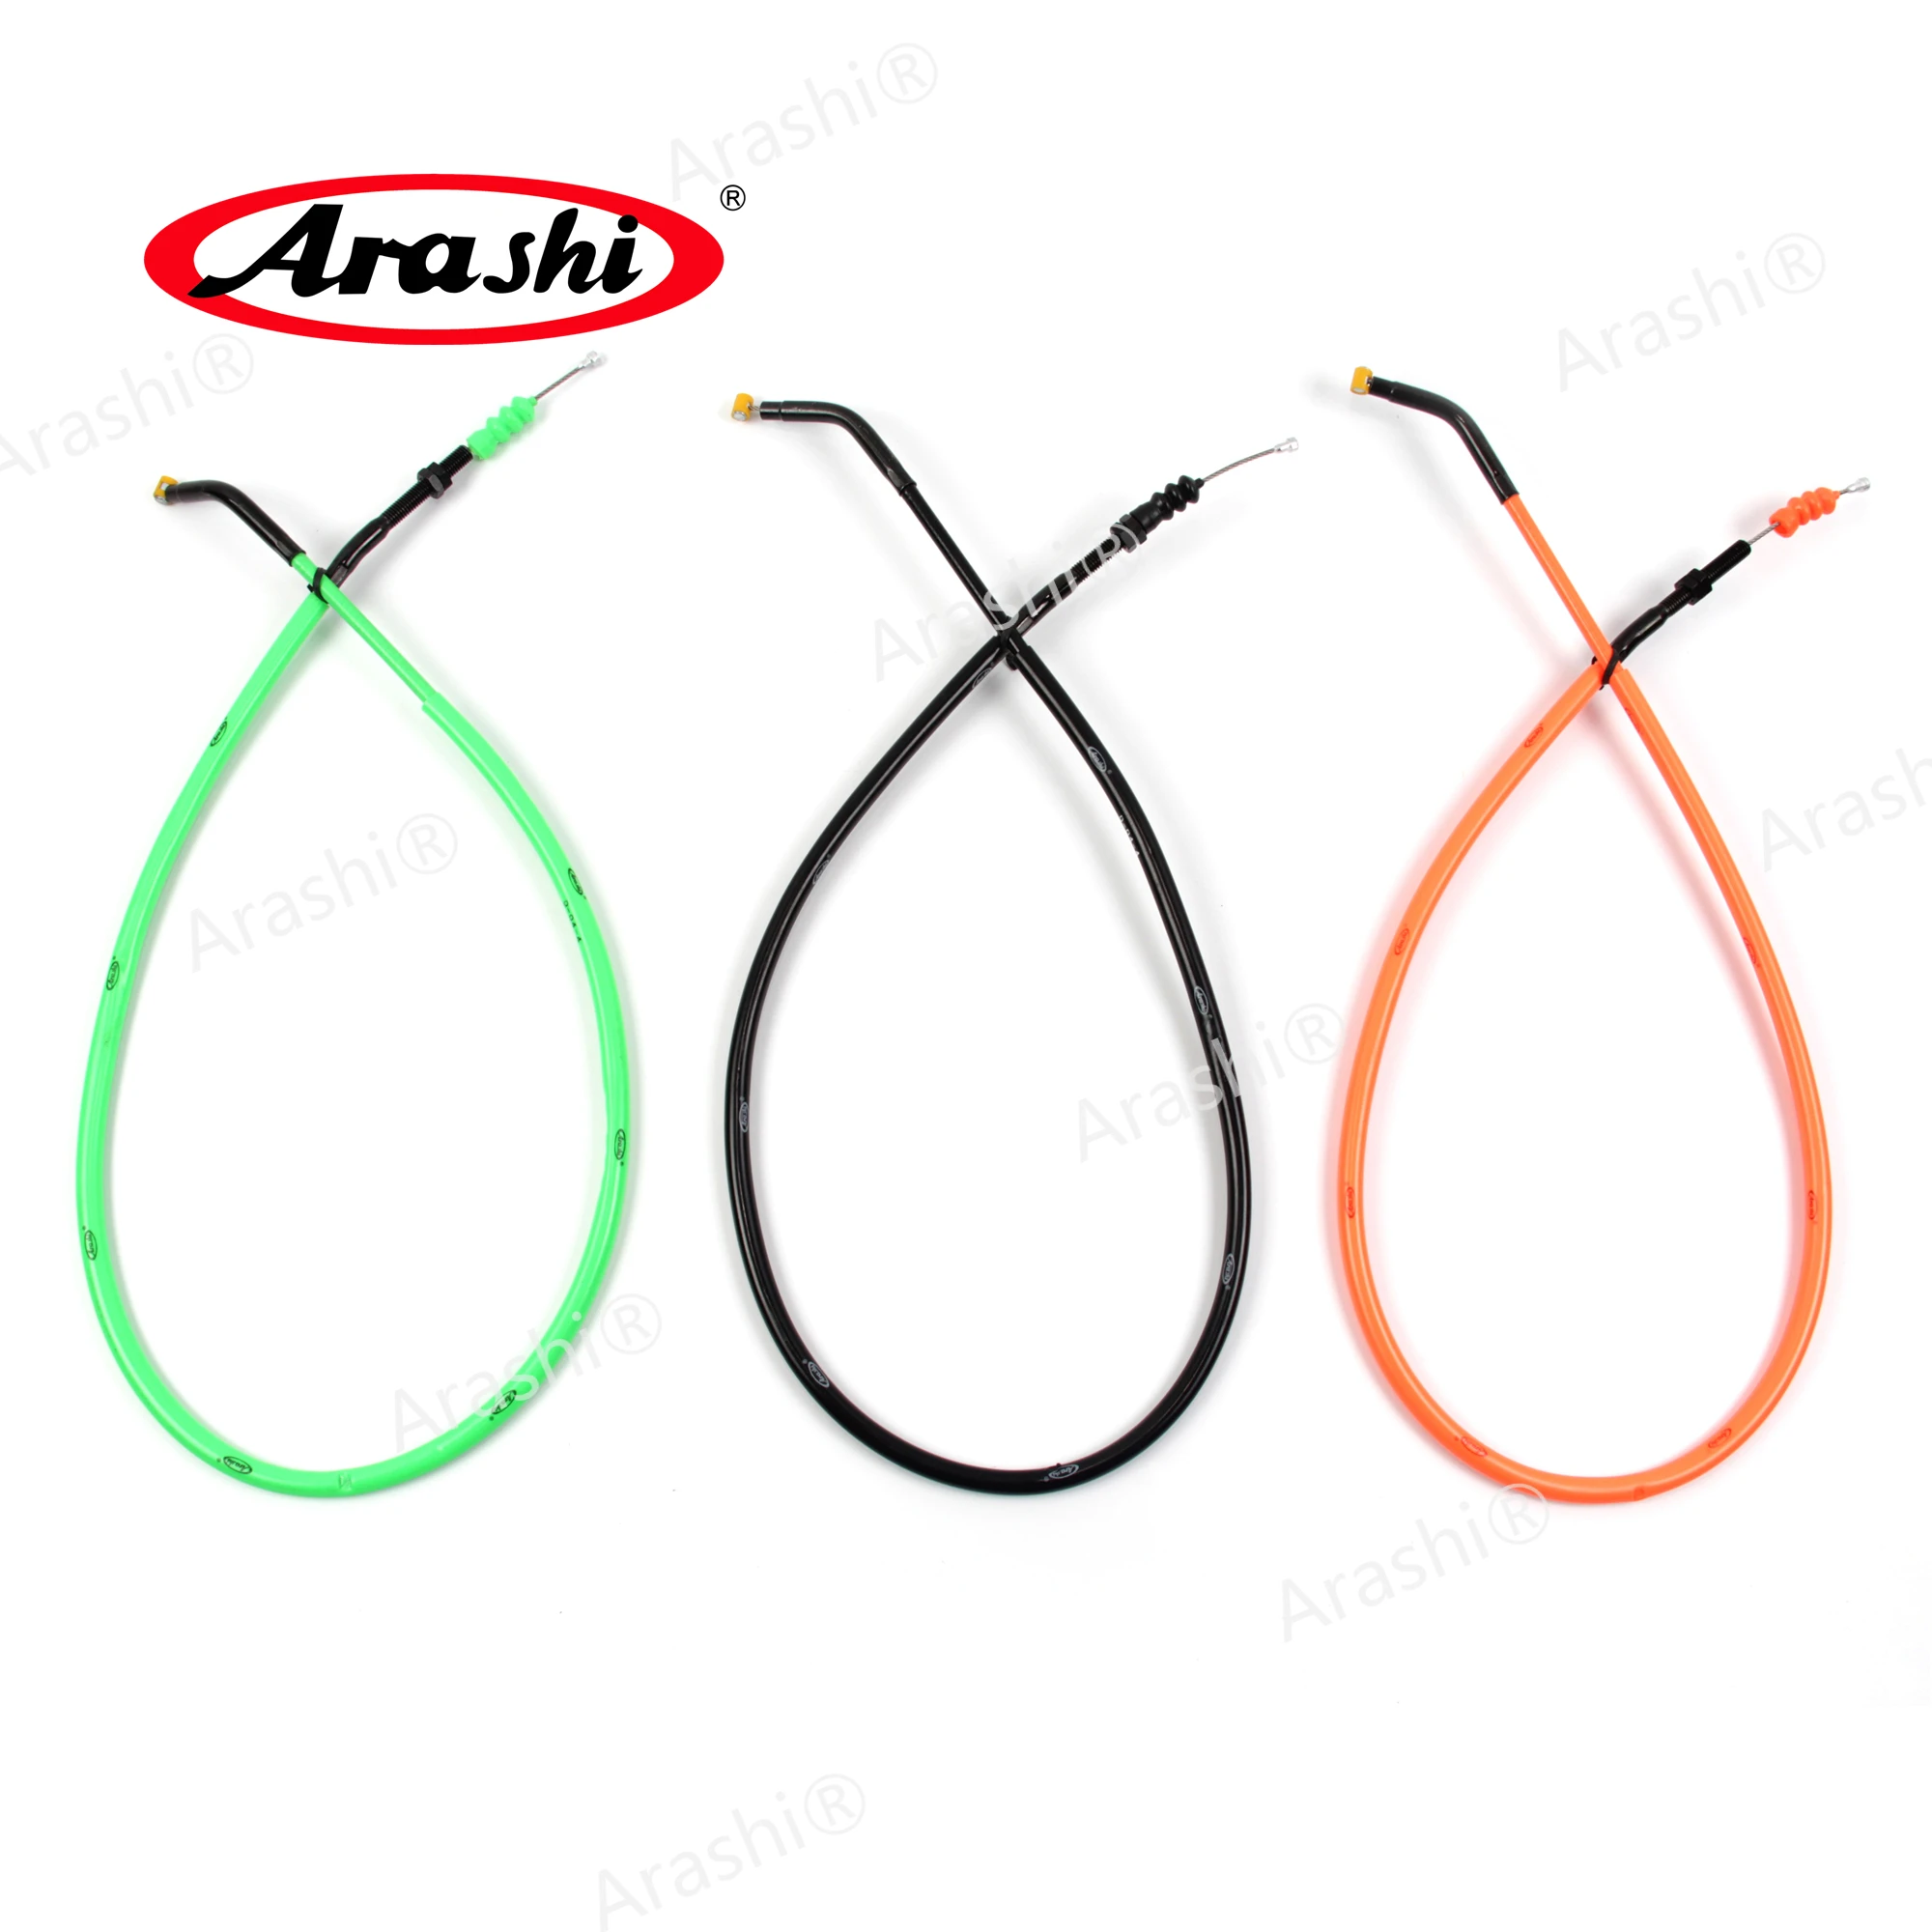 

Arashi Motorcycle Accessories Parts Clutch Cable Linkage Line Stainless Wire for KAWASAKI Z1000 2014 2015 2016 Z 1000 1 PCS